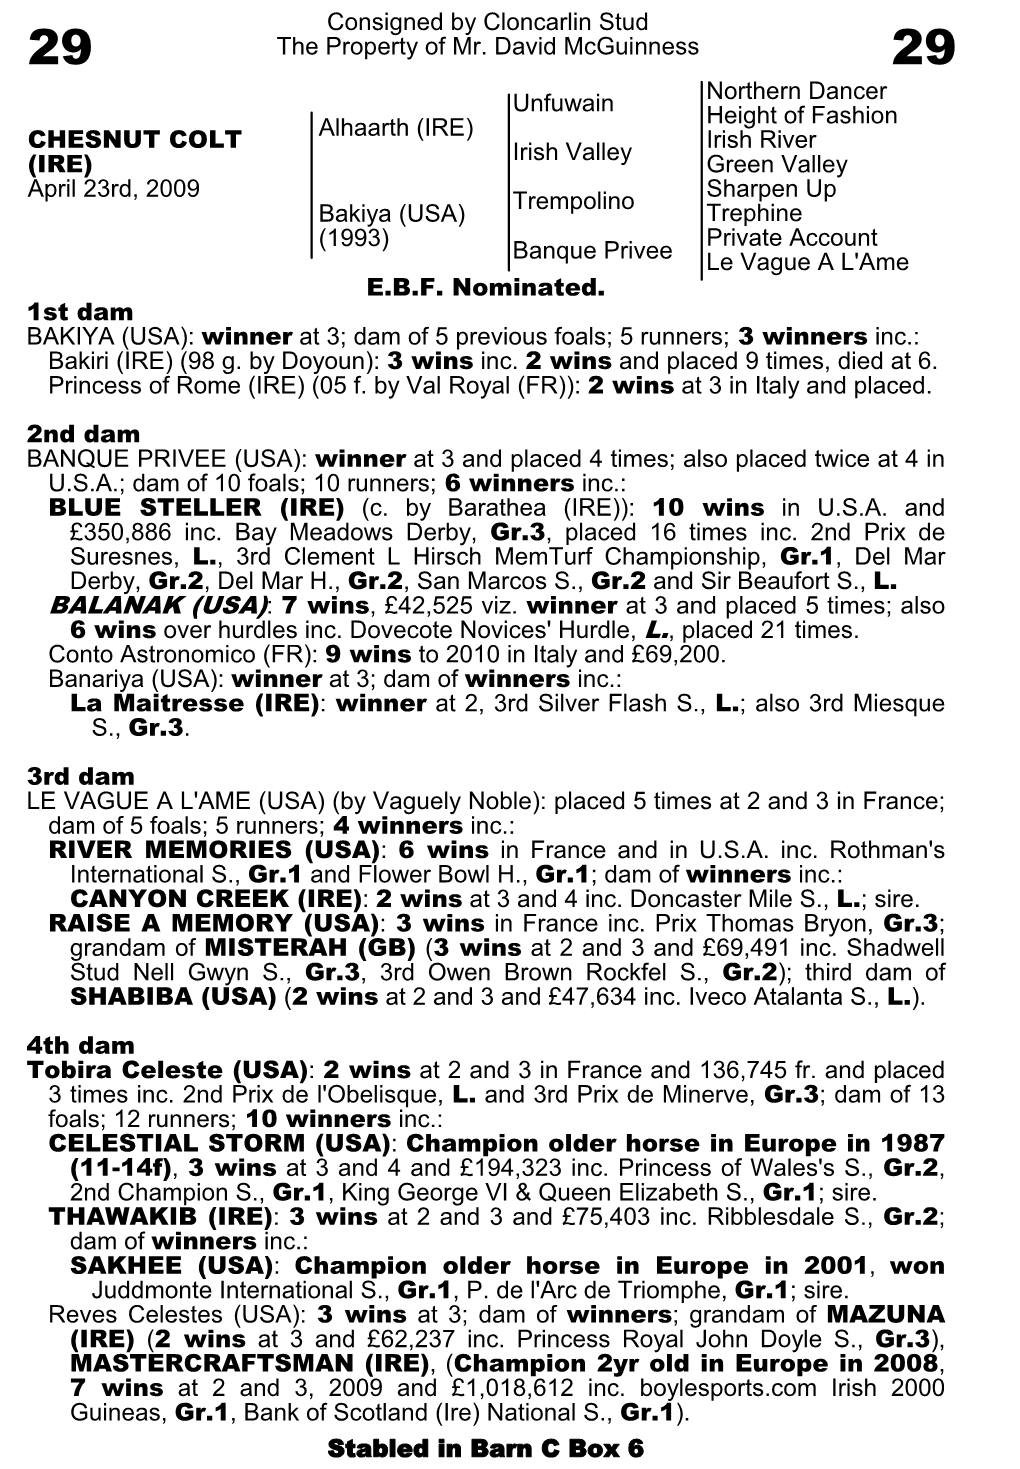 Consigned by Cloncarlin Stud the Property of Mr. David